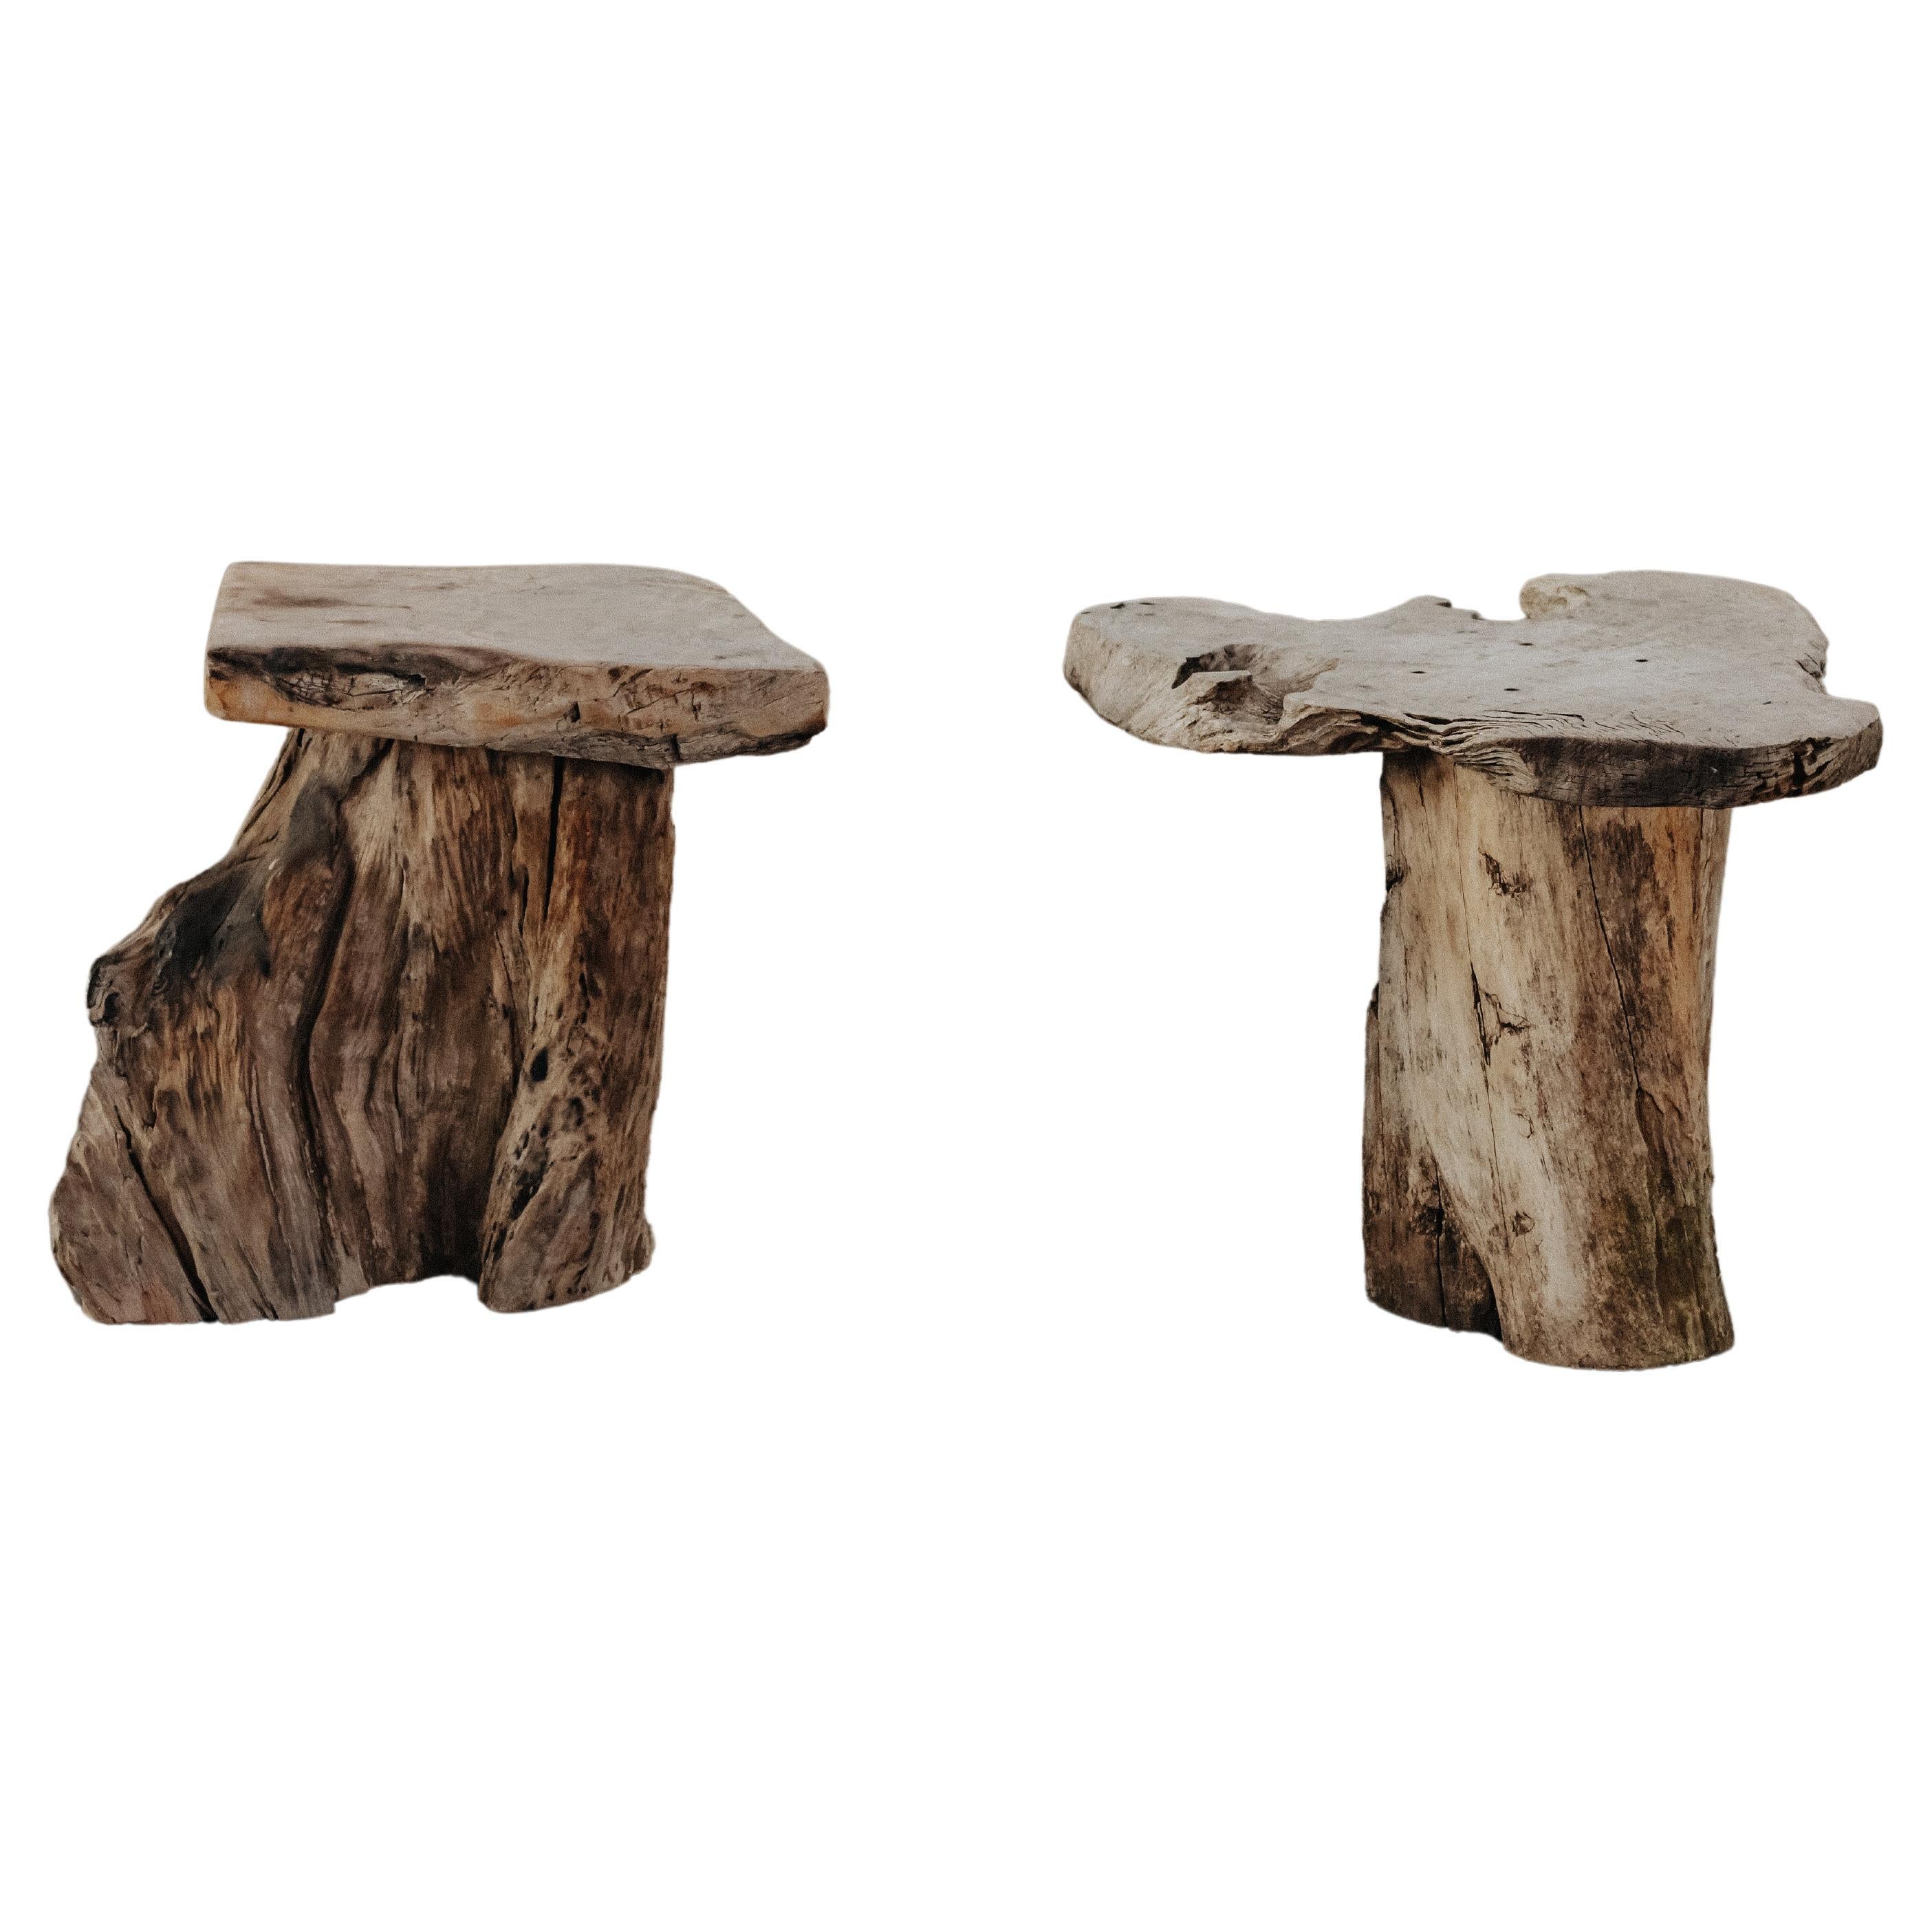 Primitive Pair Of Wood Side Tables From France, Circa 1950